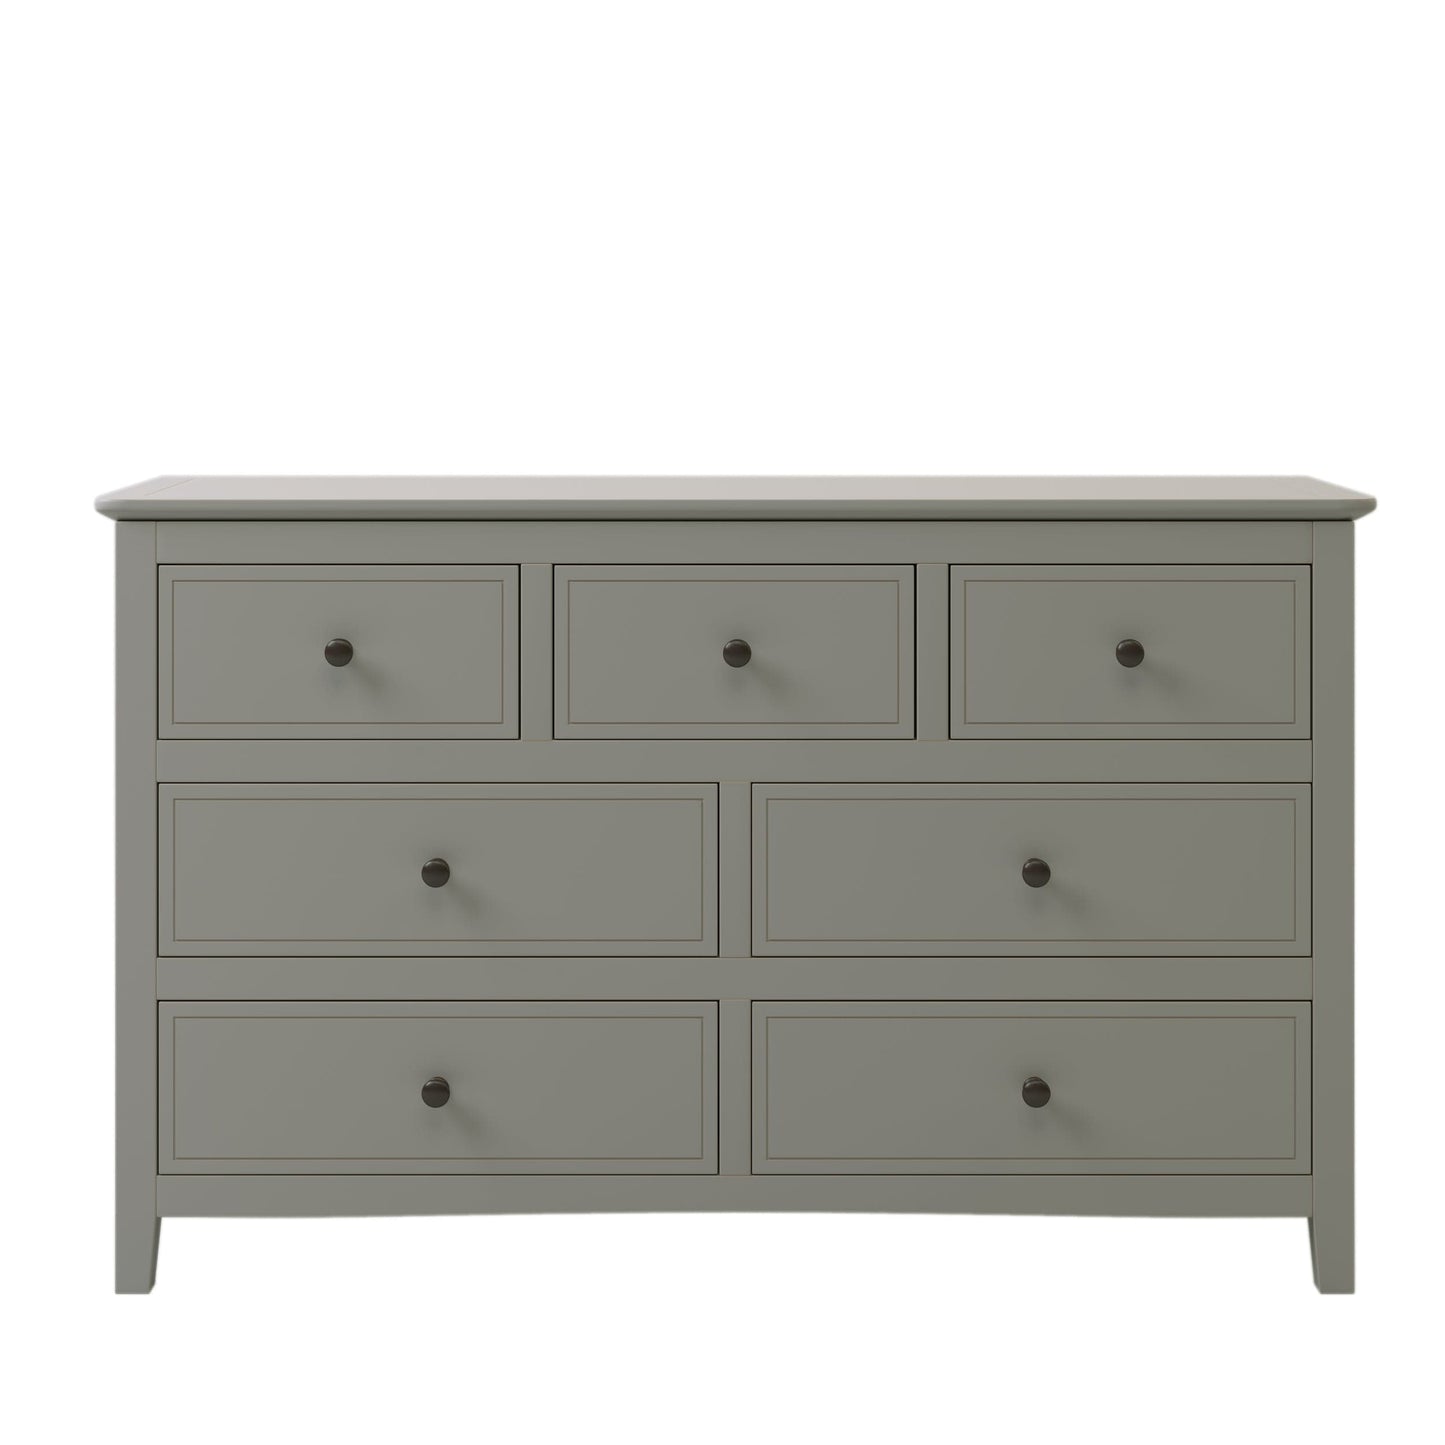 7 Drawers Solid Wood Dresser,Gray